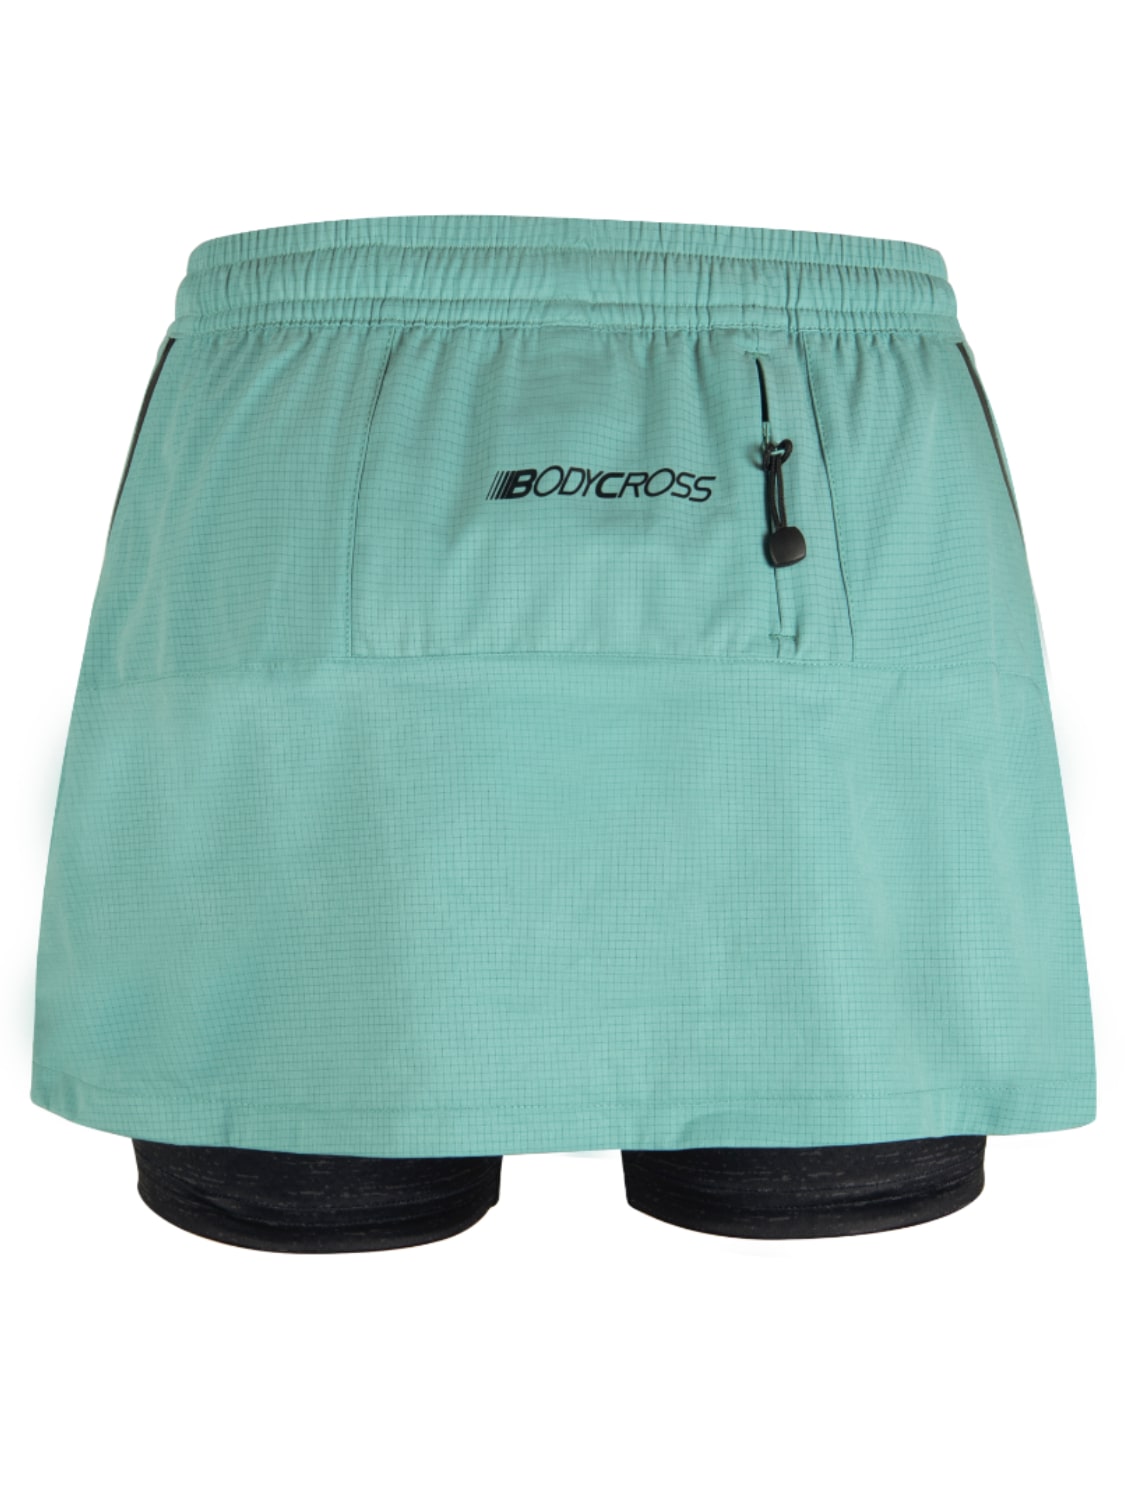 ANGY 3 in 1 Short/Skirt